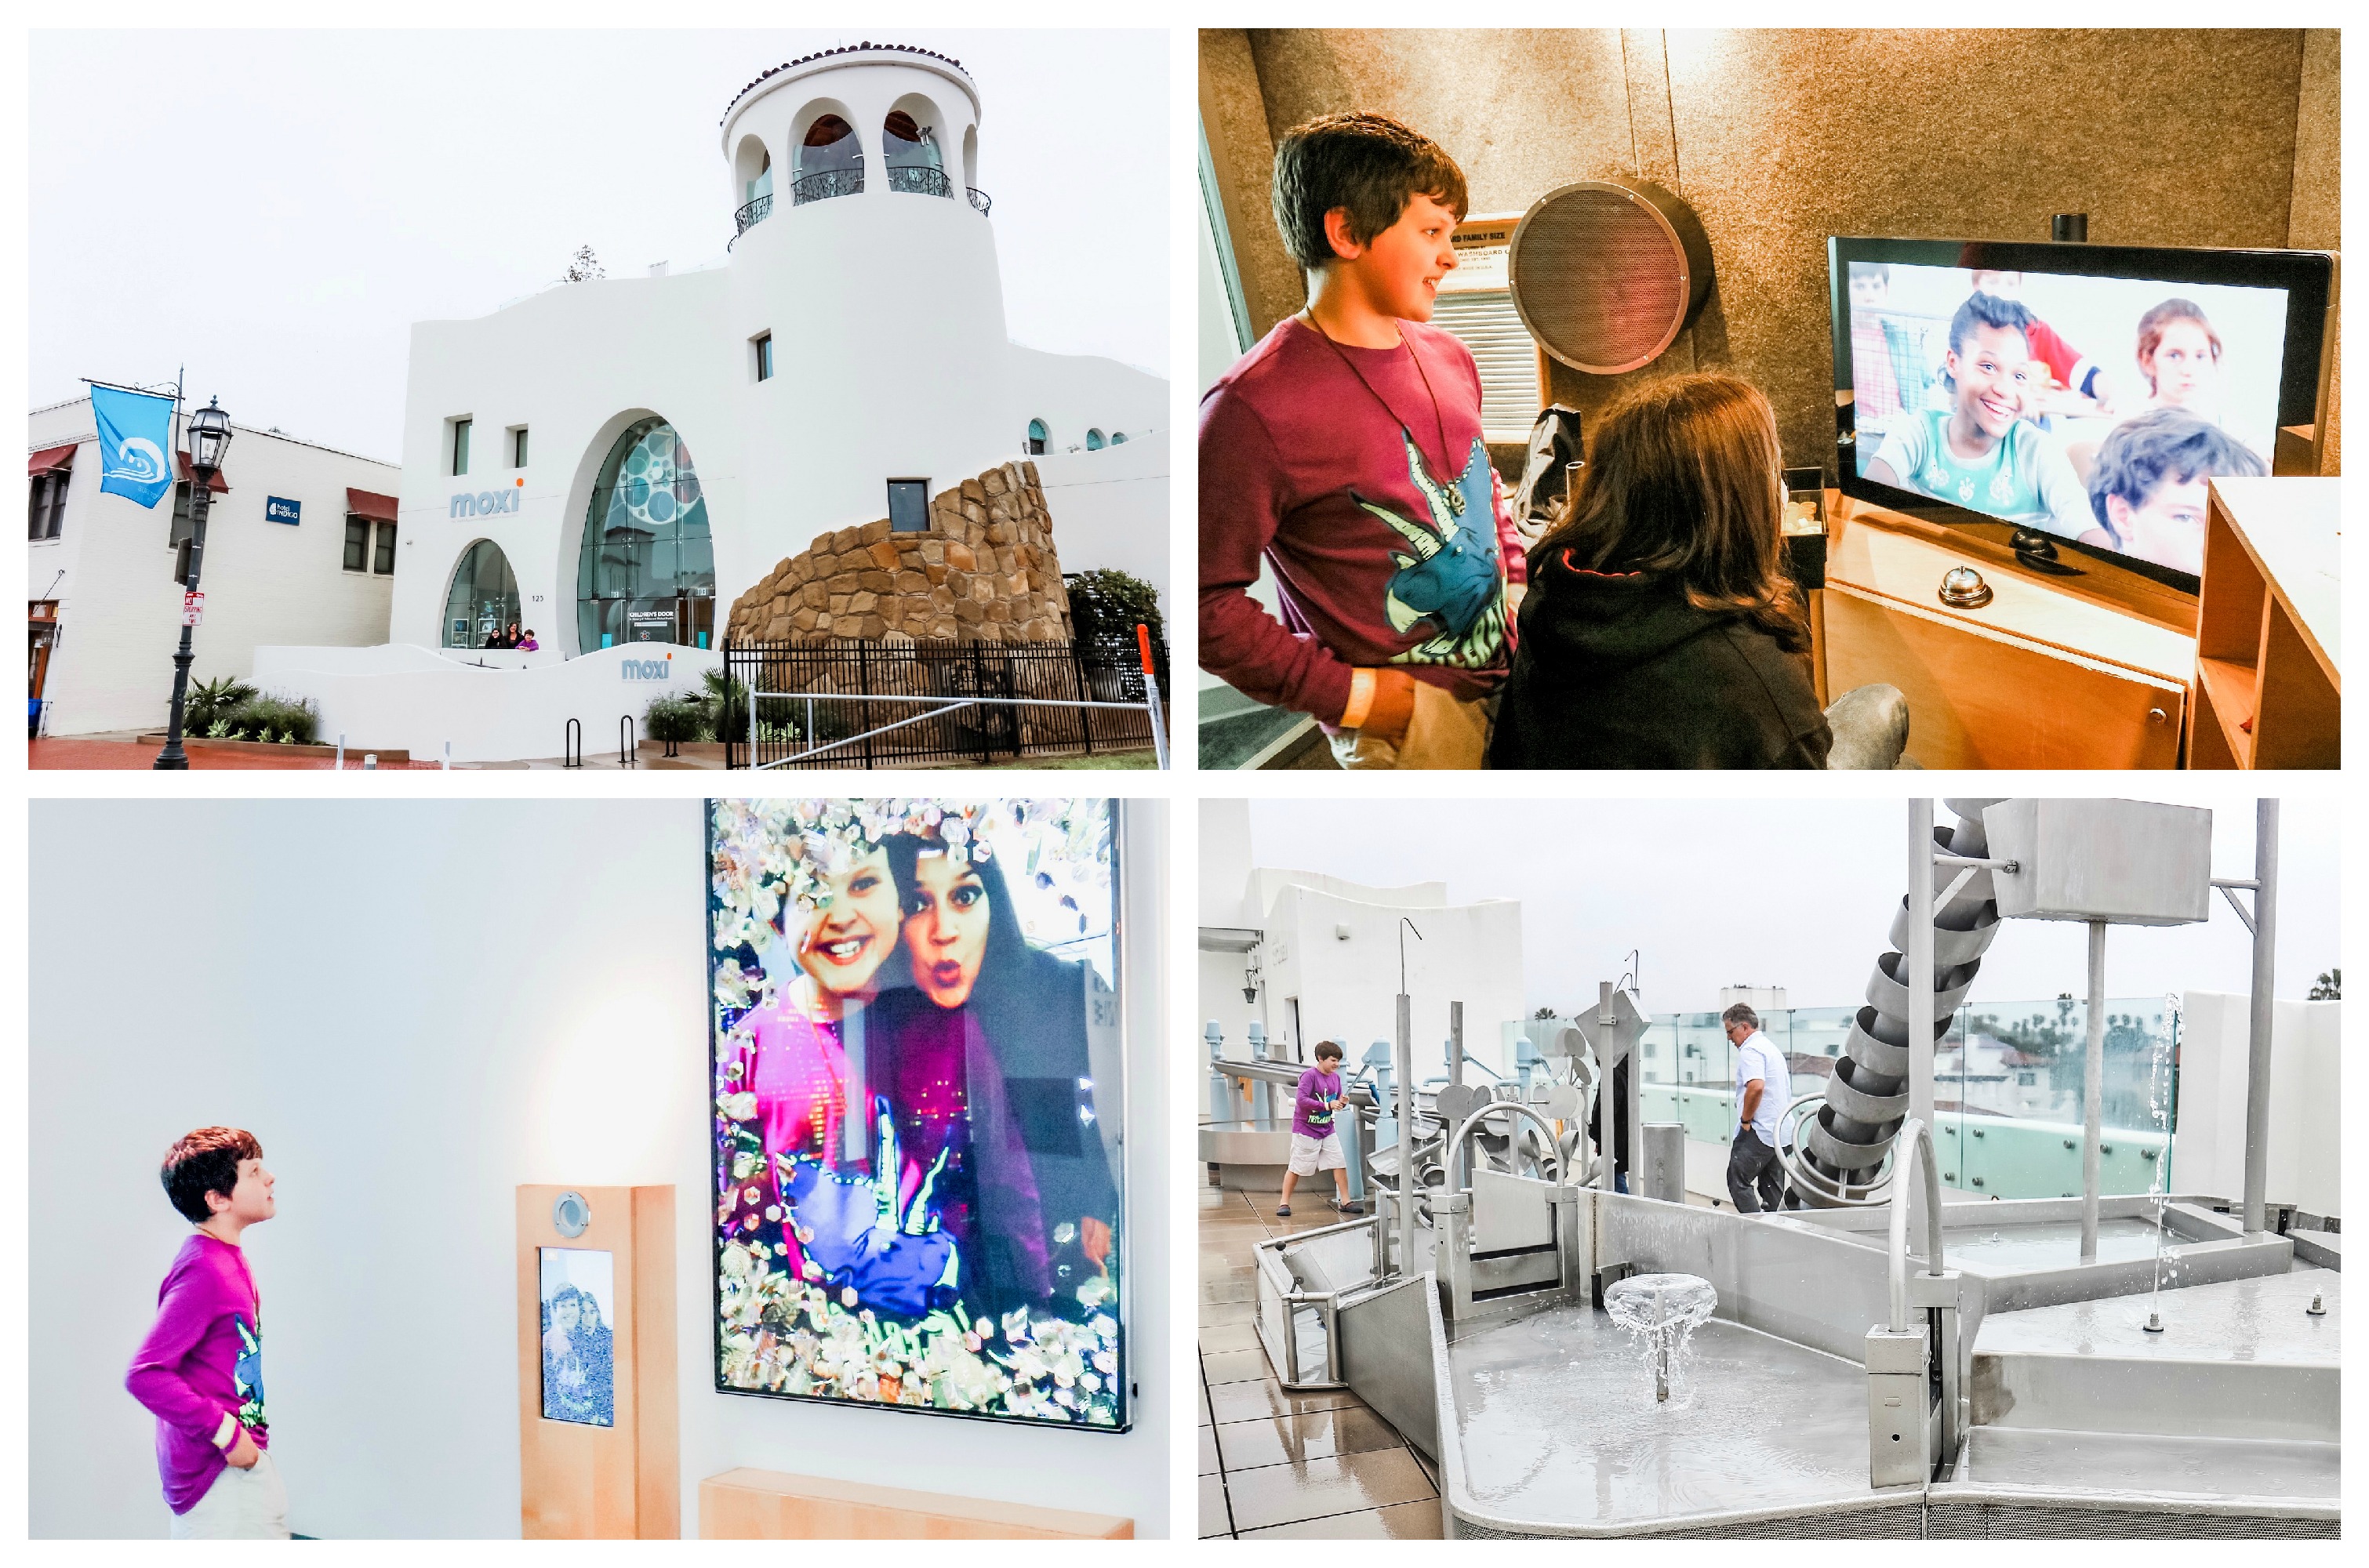 30 Awesome Things to Do with Kids in Santa Barbara